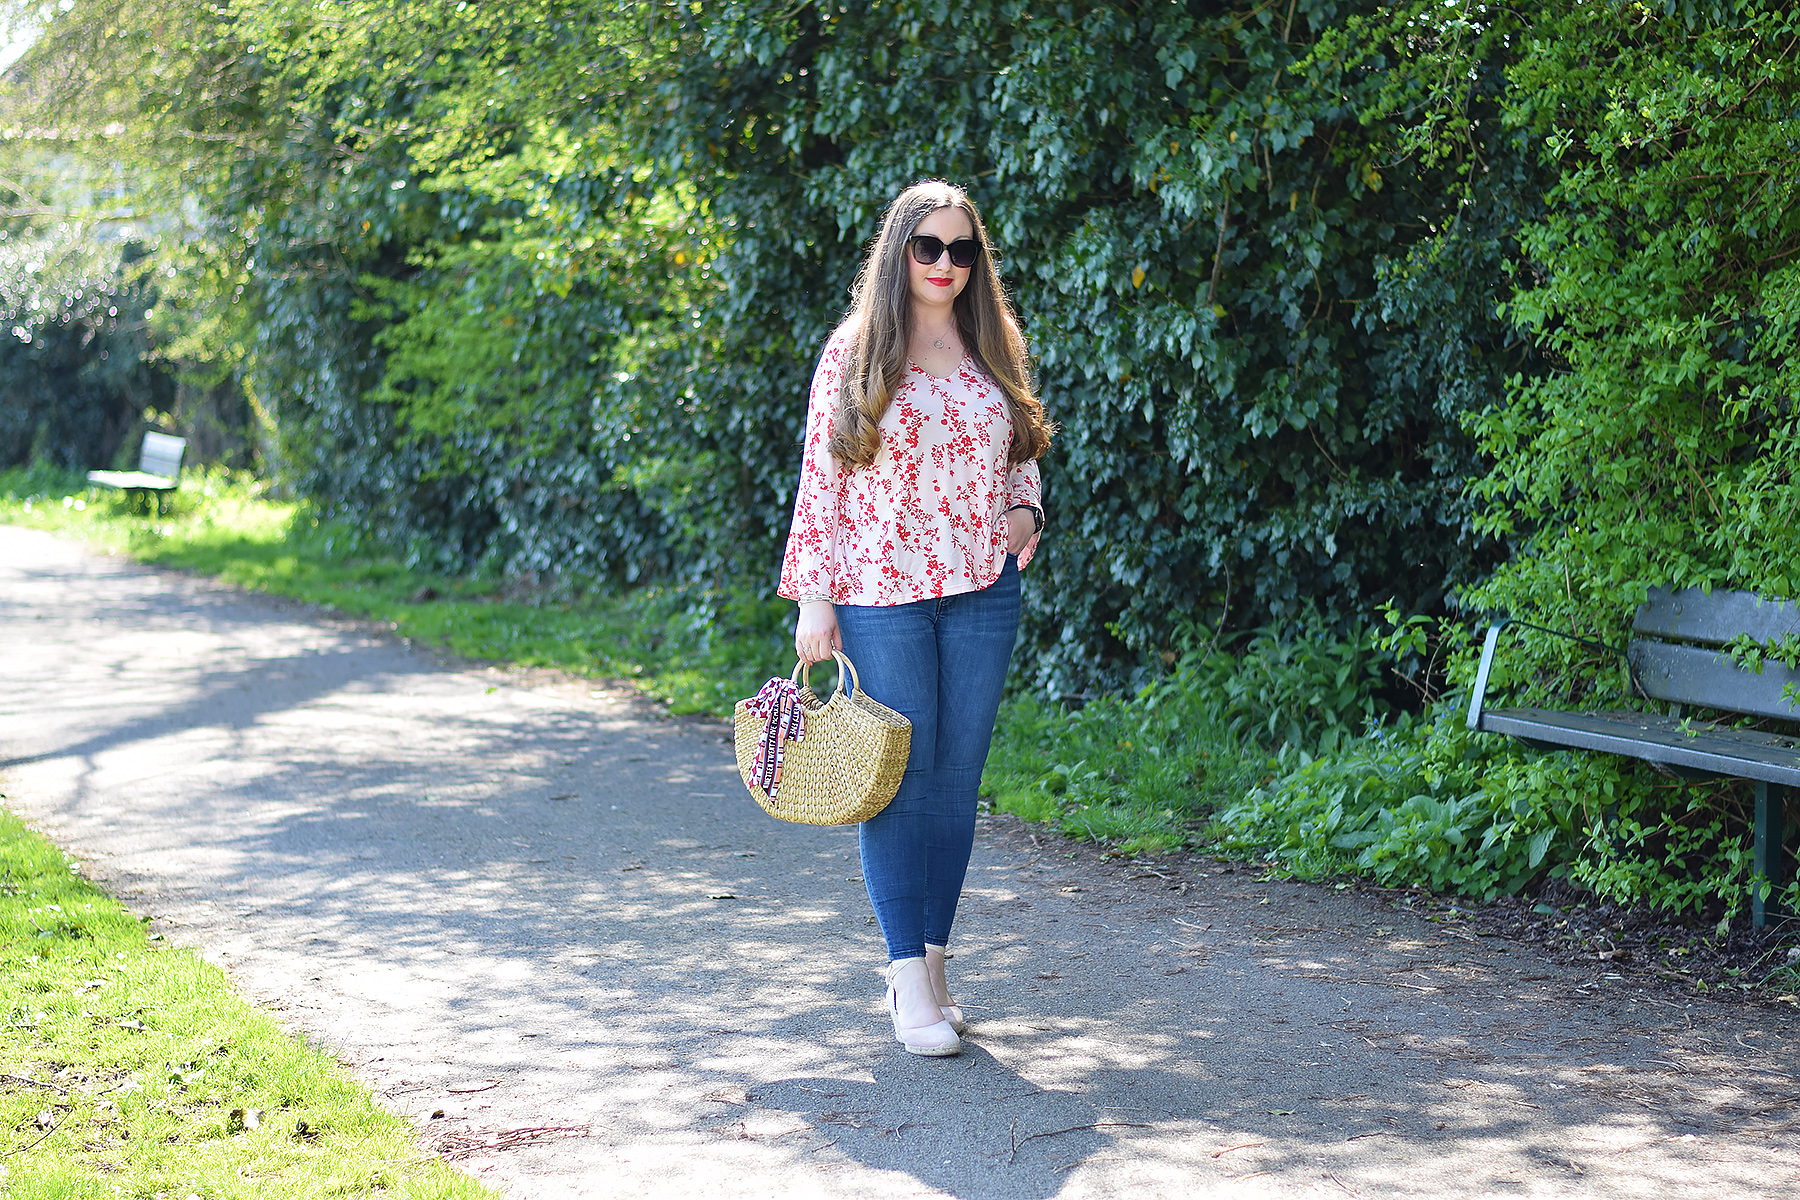 Boho style floral top outfit